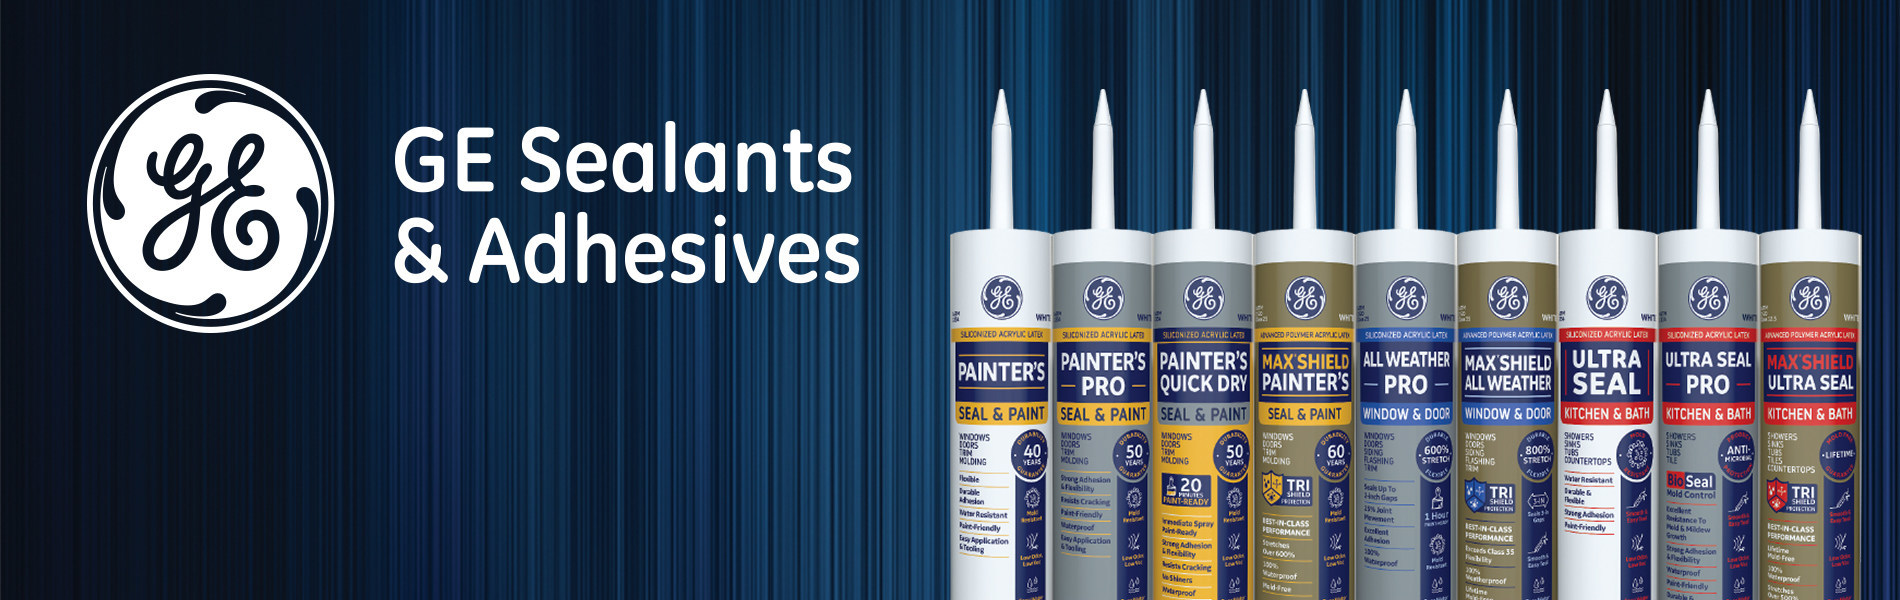 Ge Sealants Adhesives To Include New Siliconized Acrylic